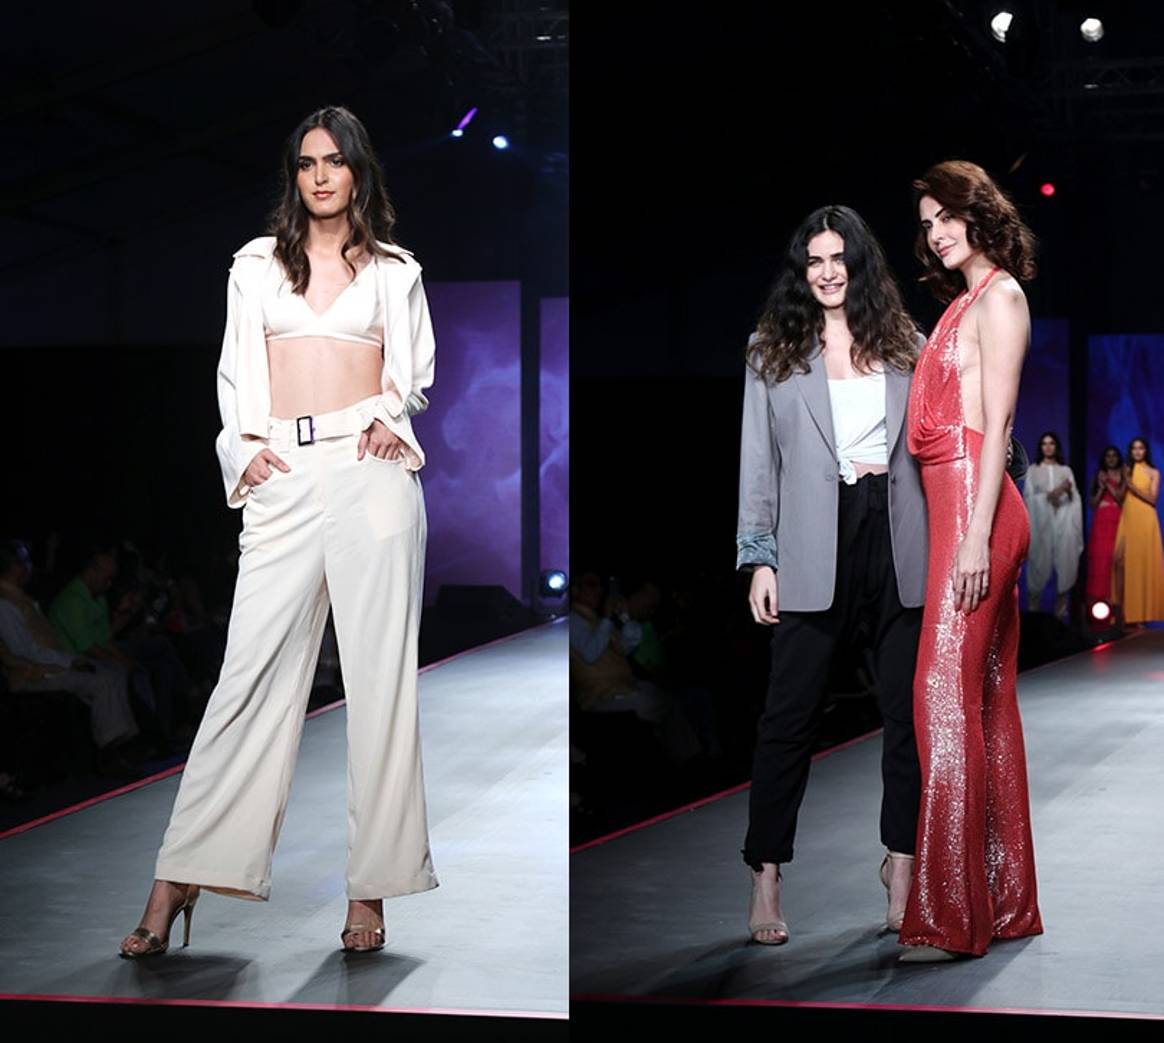 POST EVENT PRESS RELEASE - Exclusive launch of Pernia's Pop-Up Runway Spring/Summer'19